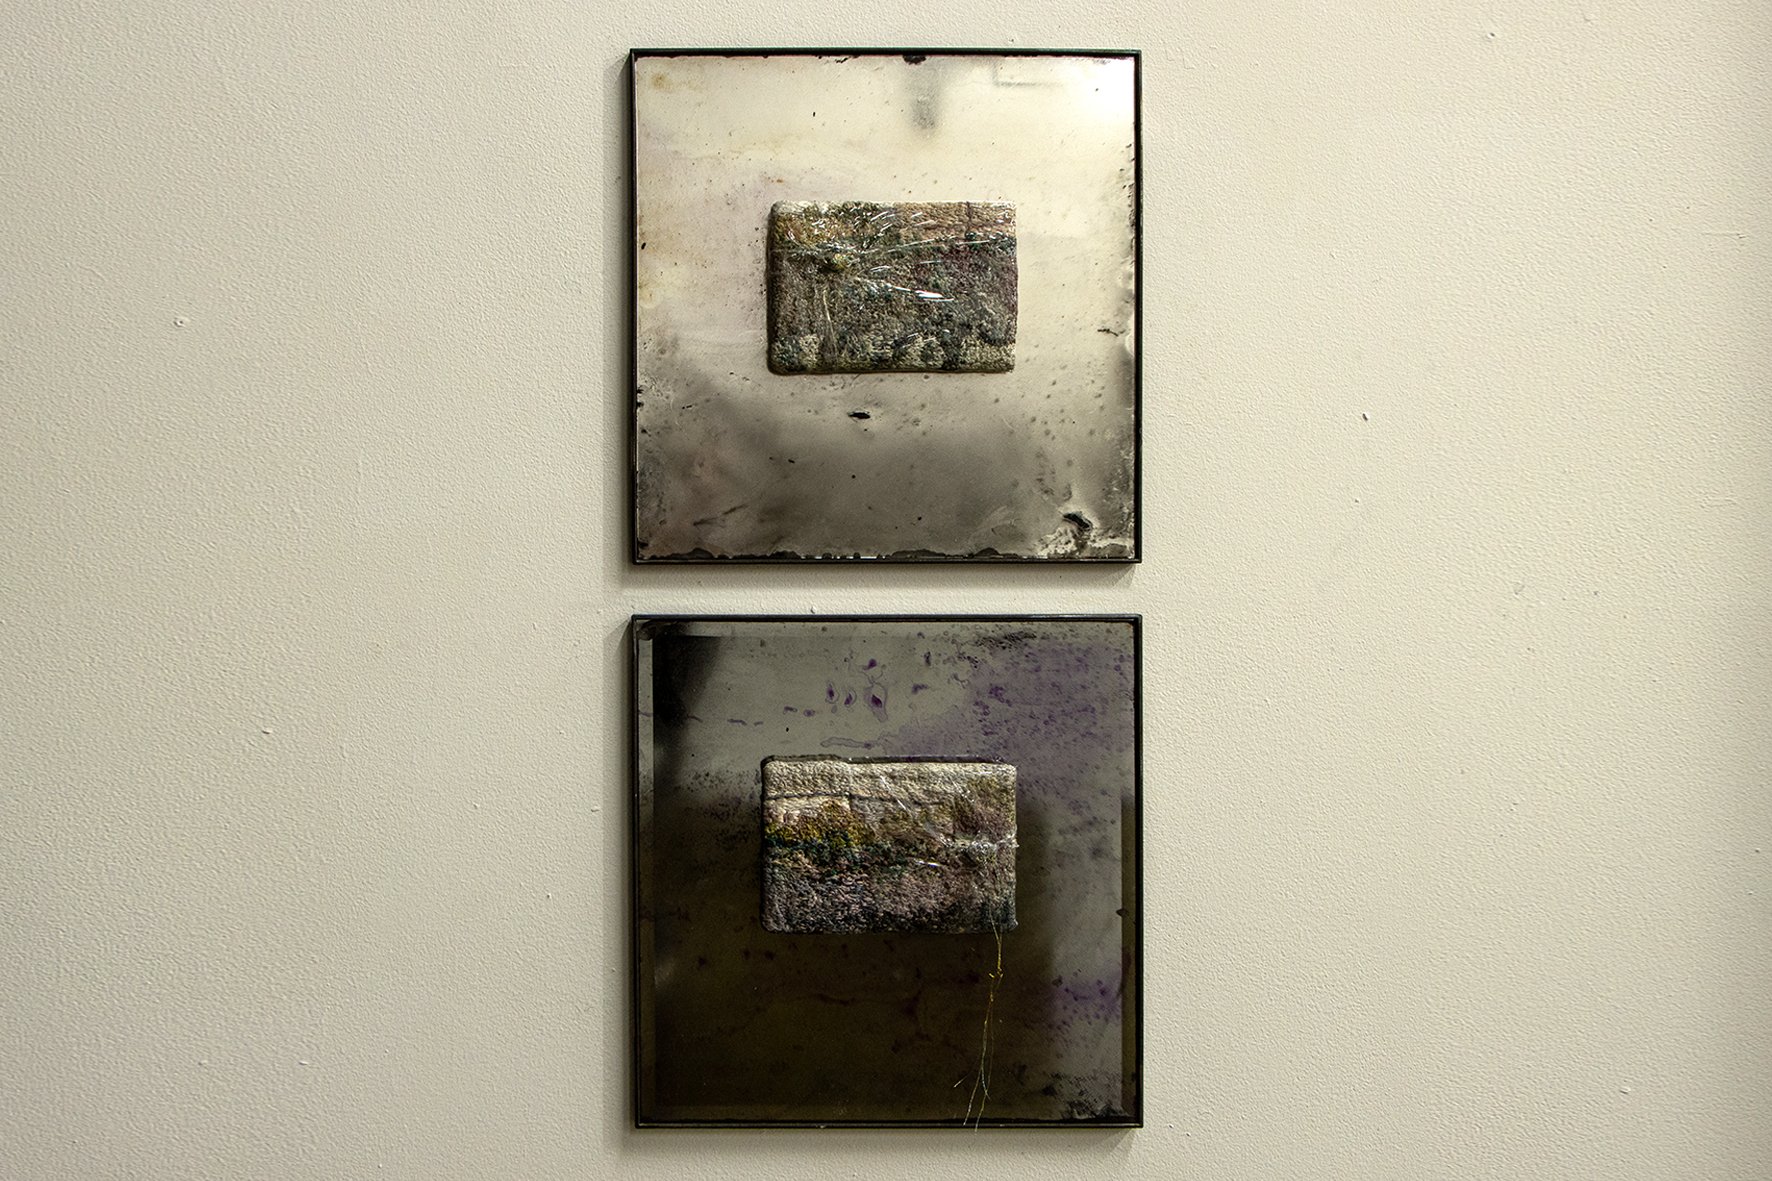  Paint, pvc, mixed media, embroidery on painted mirror, steel frame, 300 x 320mm   